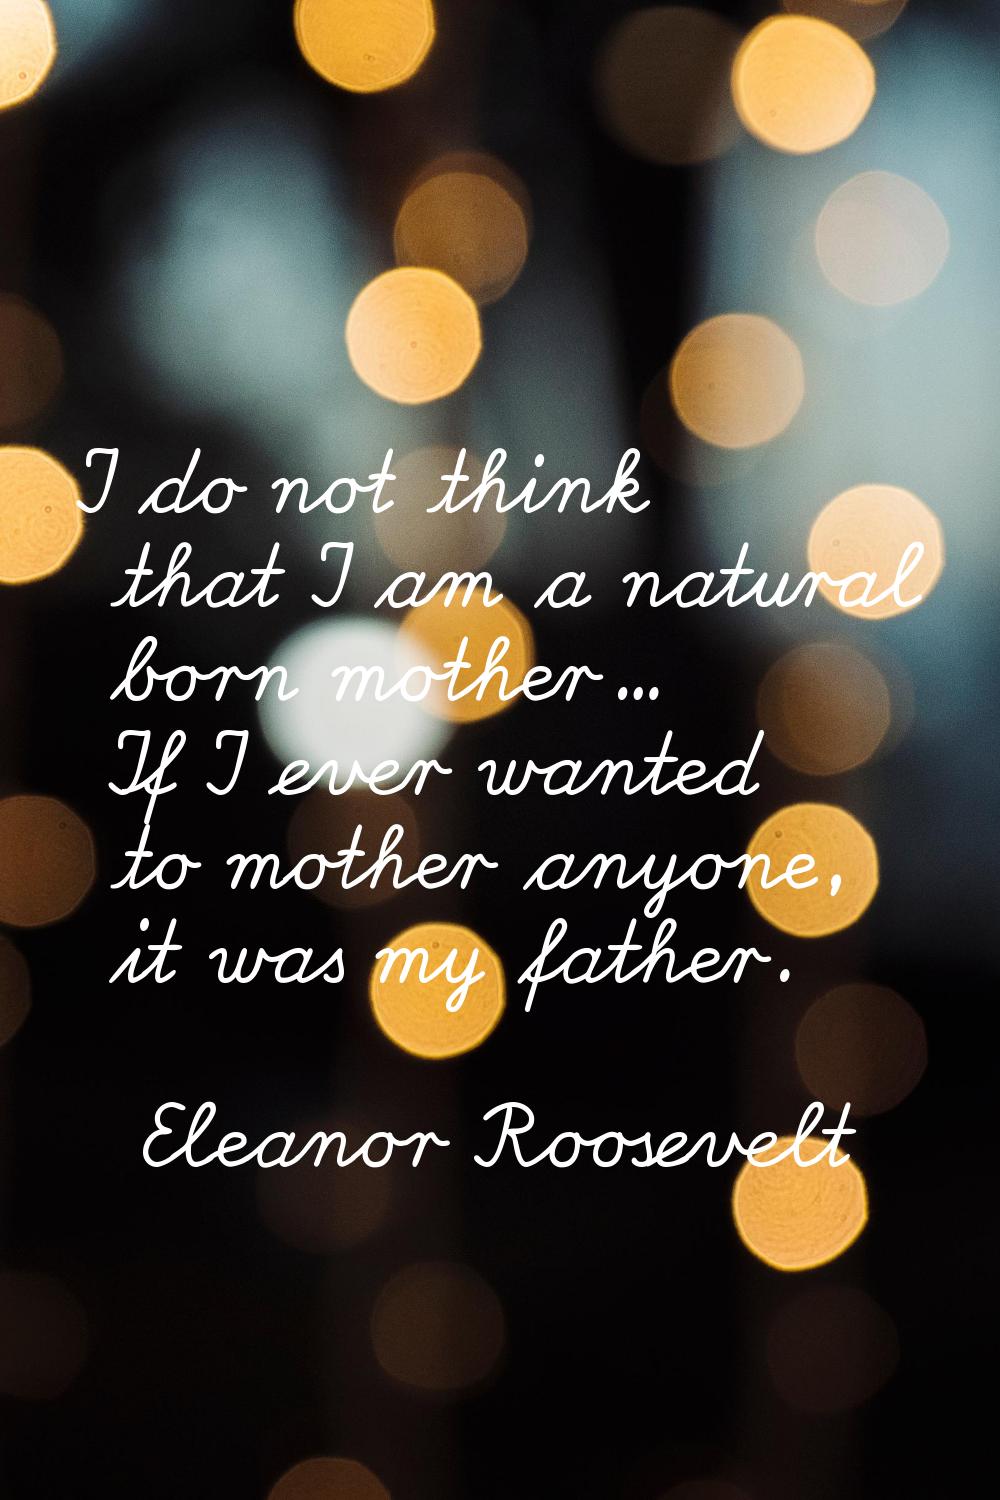 I do not think that I am a natural born mother... If I ever wanted to mother anyone, it was my fath